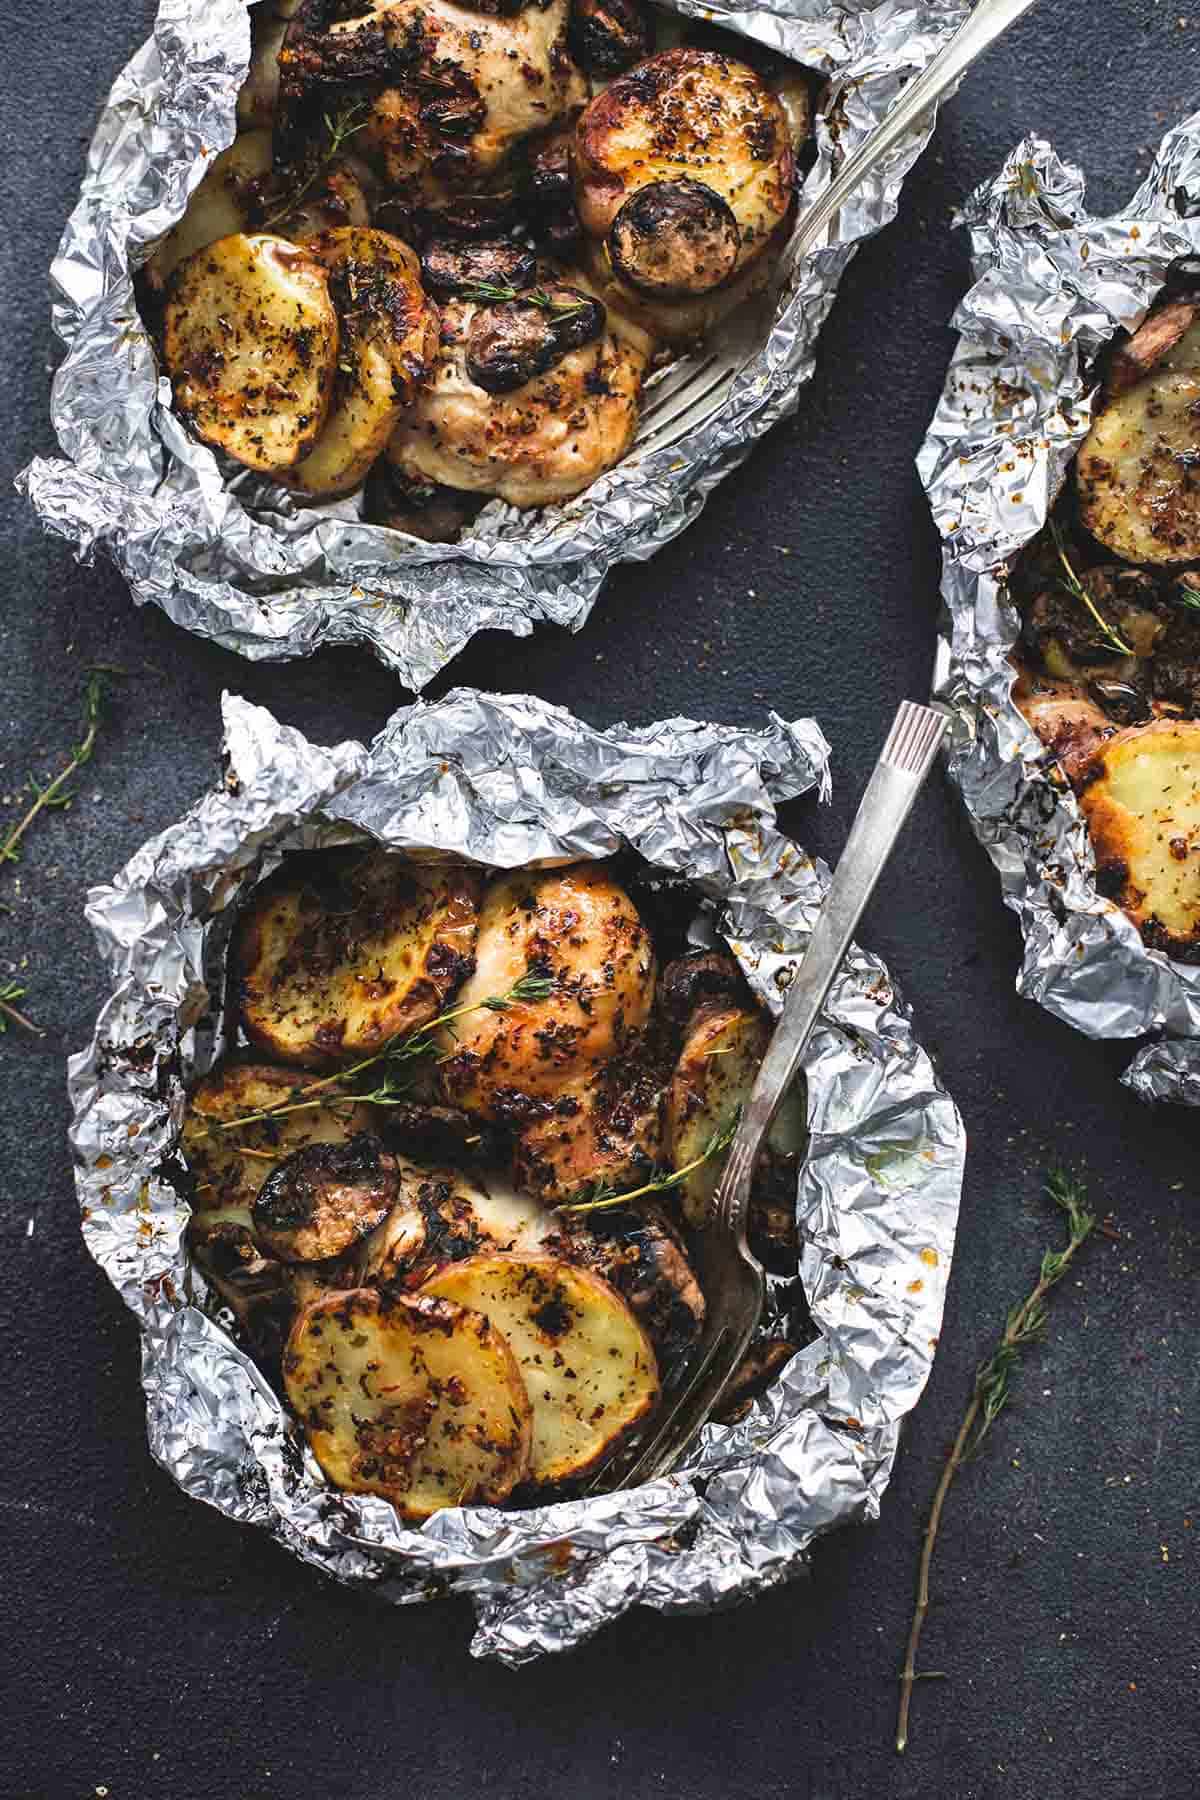 Three foil packets filled with chicken and potatoes.